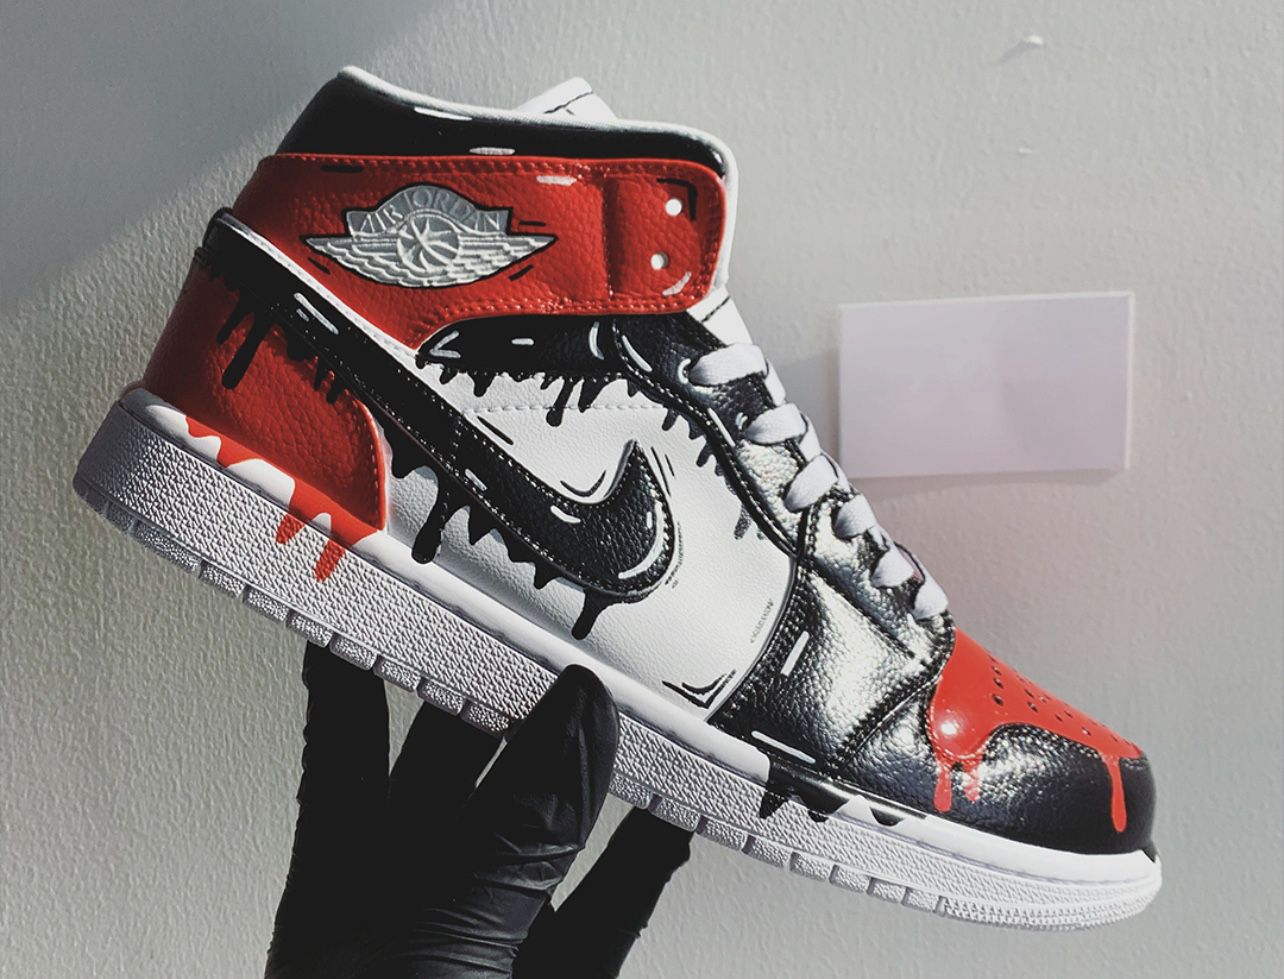 Custom NYC skyline Air Jordan 1 Mids 🗽🌃 for a client. Airbrushed